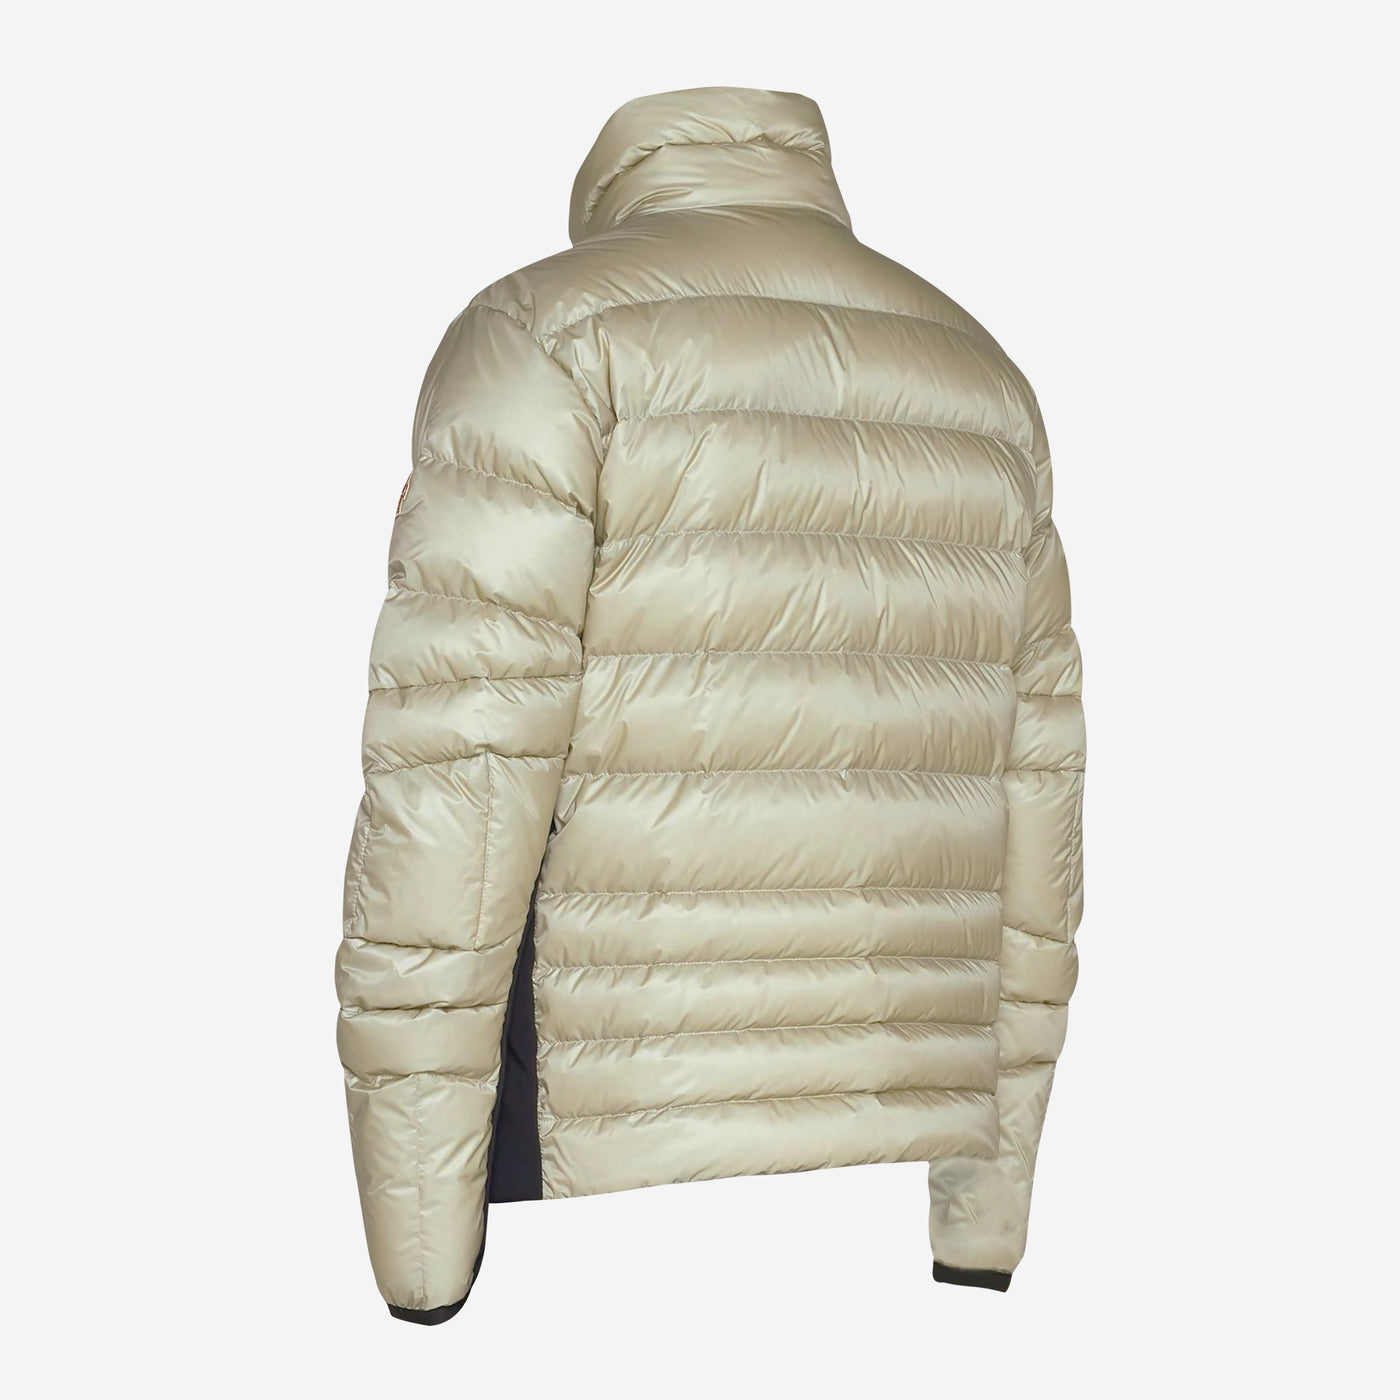 Moncler Grenoble Canmore Jacket